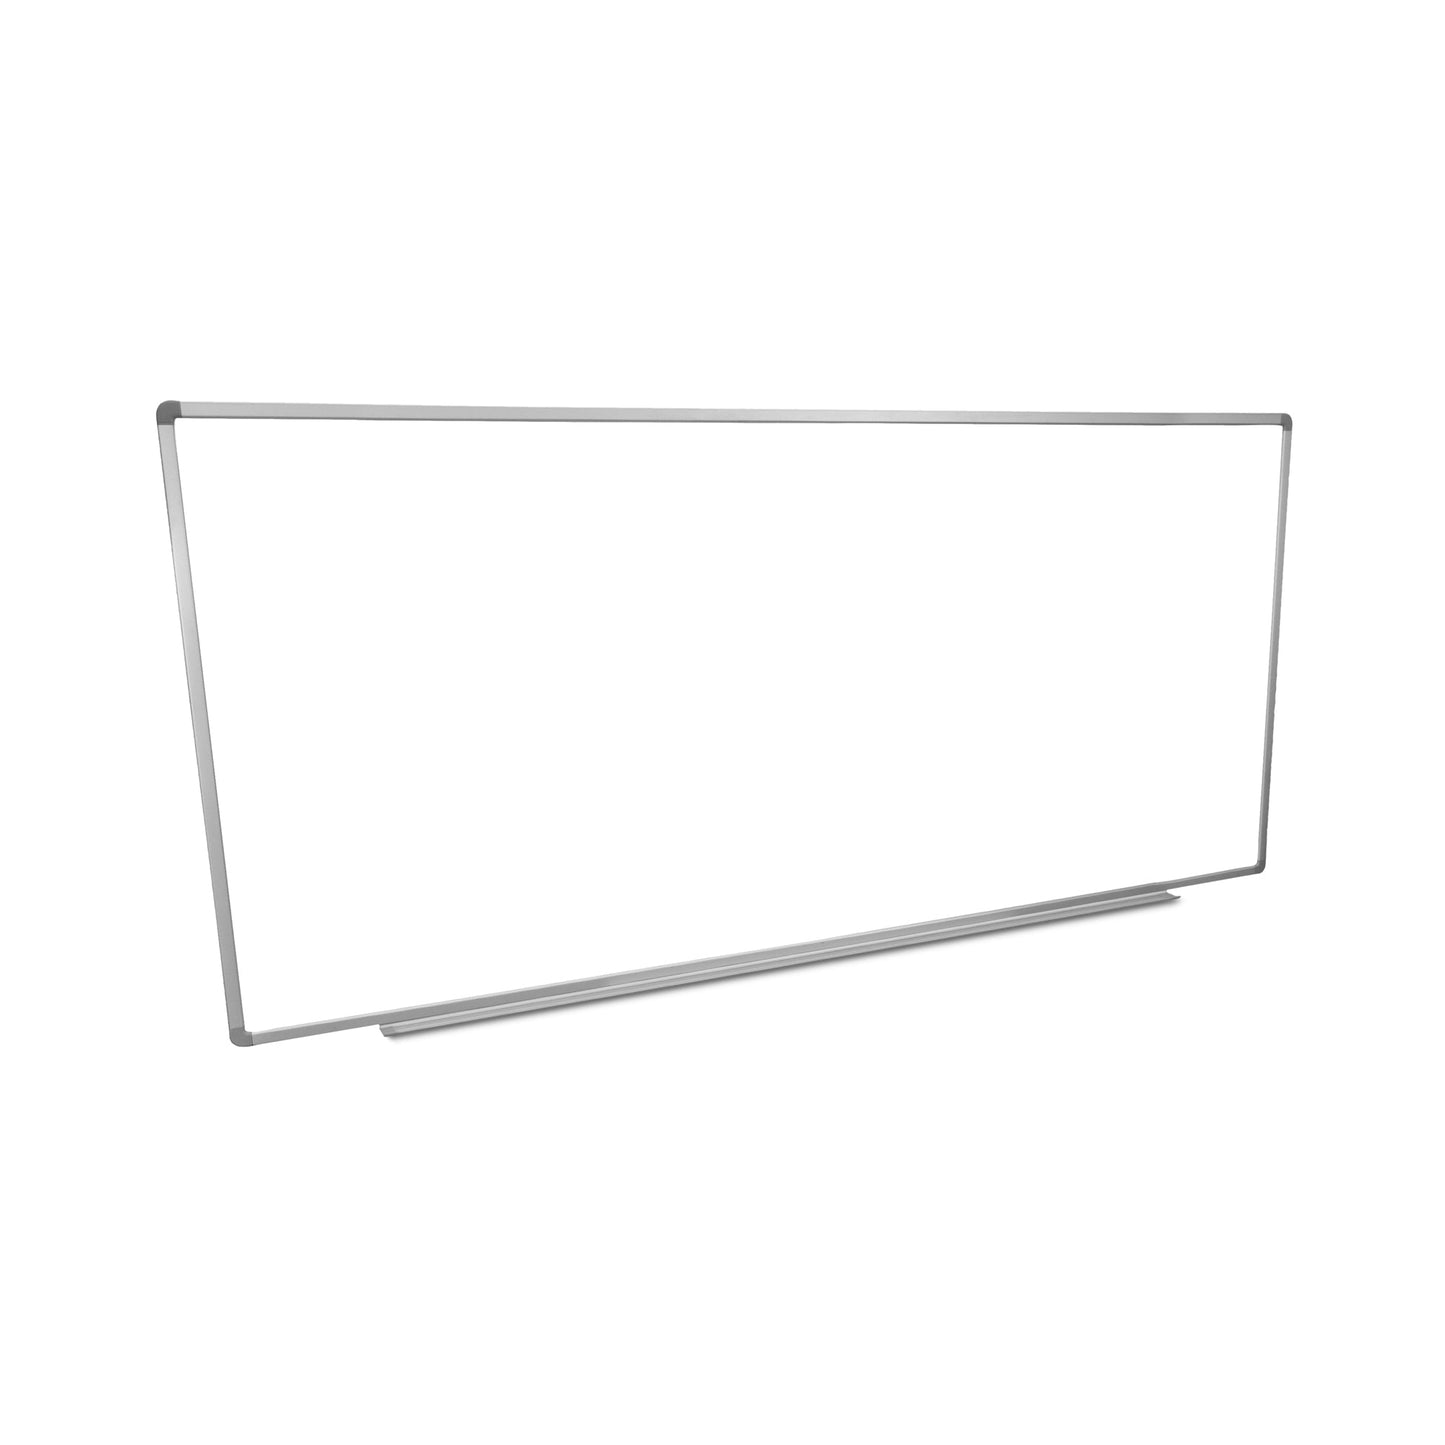 Luxor WB9640W - Wall-mounted Whiteboard 96"W x 40"H (LUX-WB9640W) - SchoolOutlet